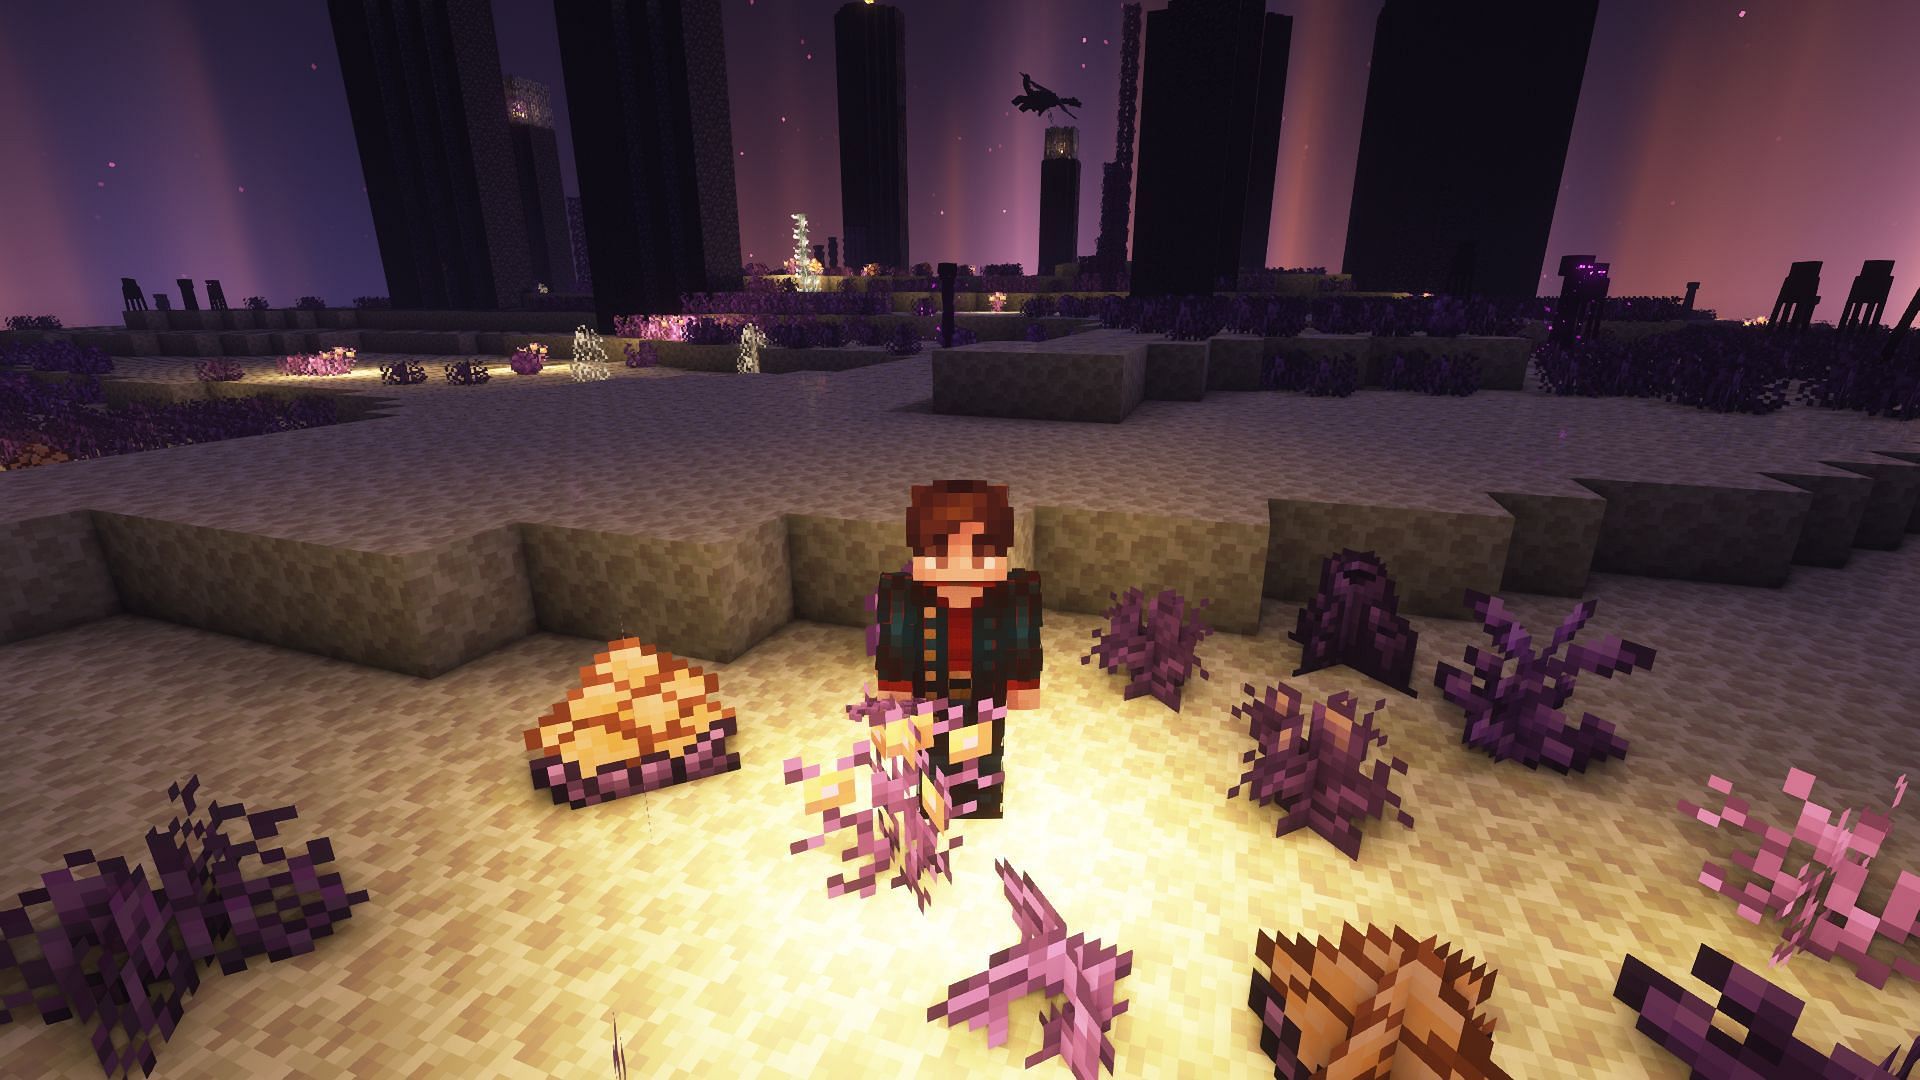 Different types of plants in the End dimension (Image via Mojang)